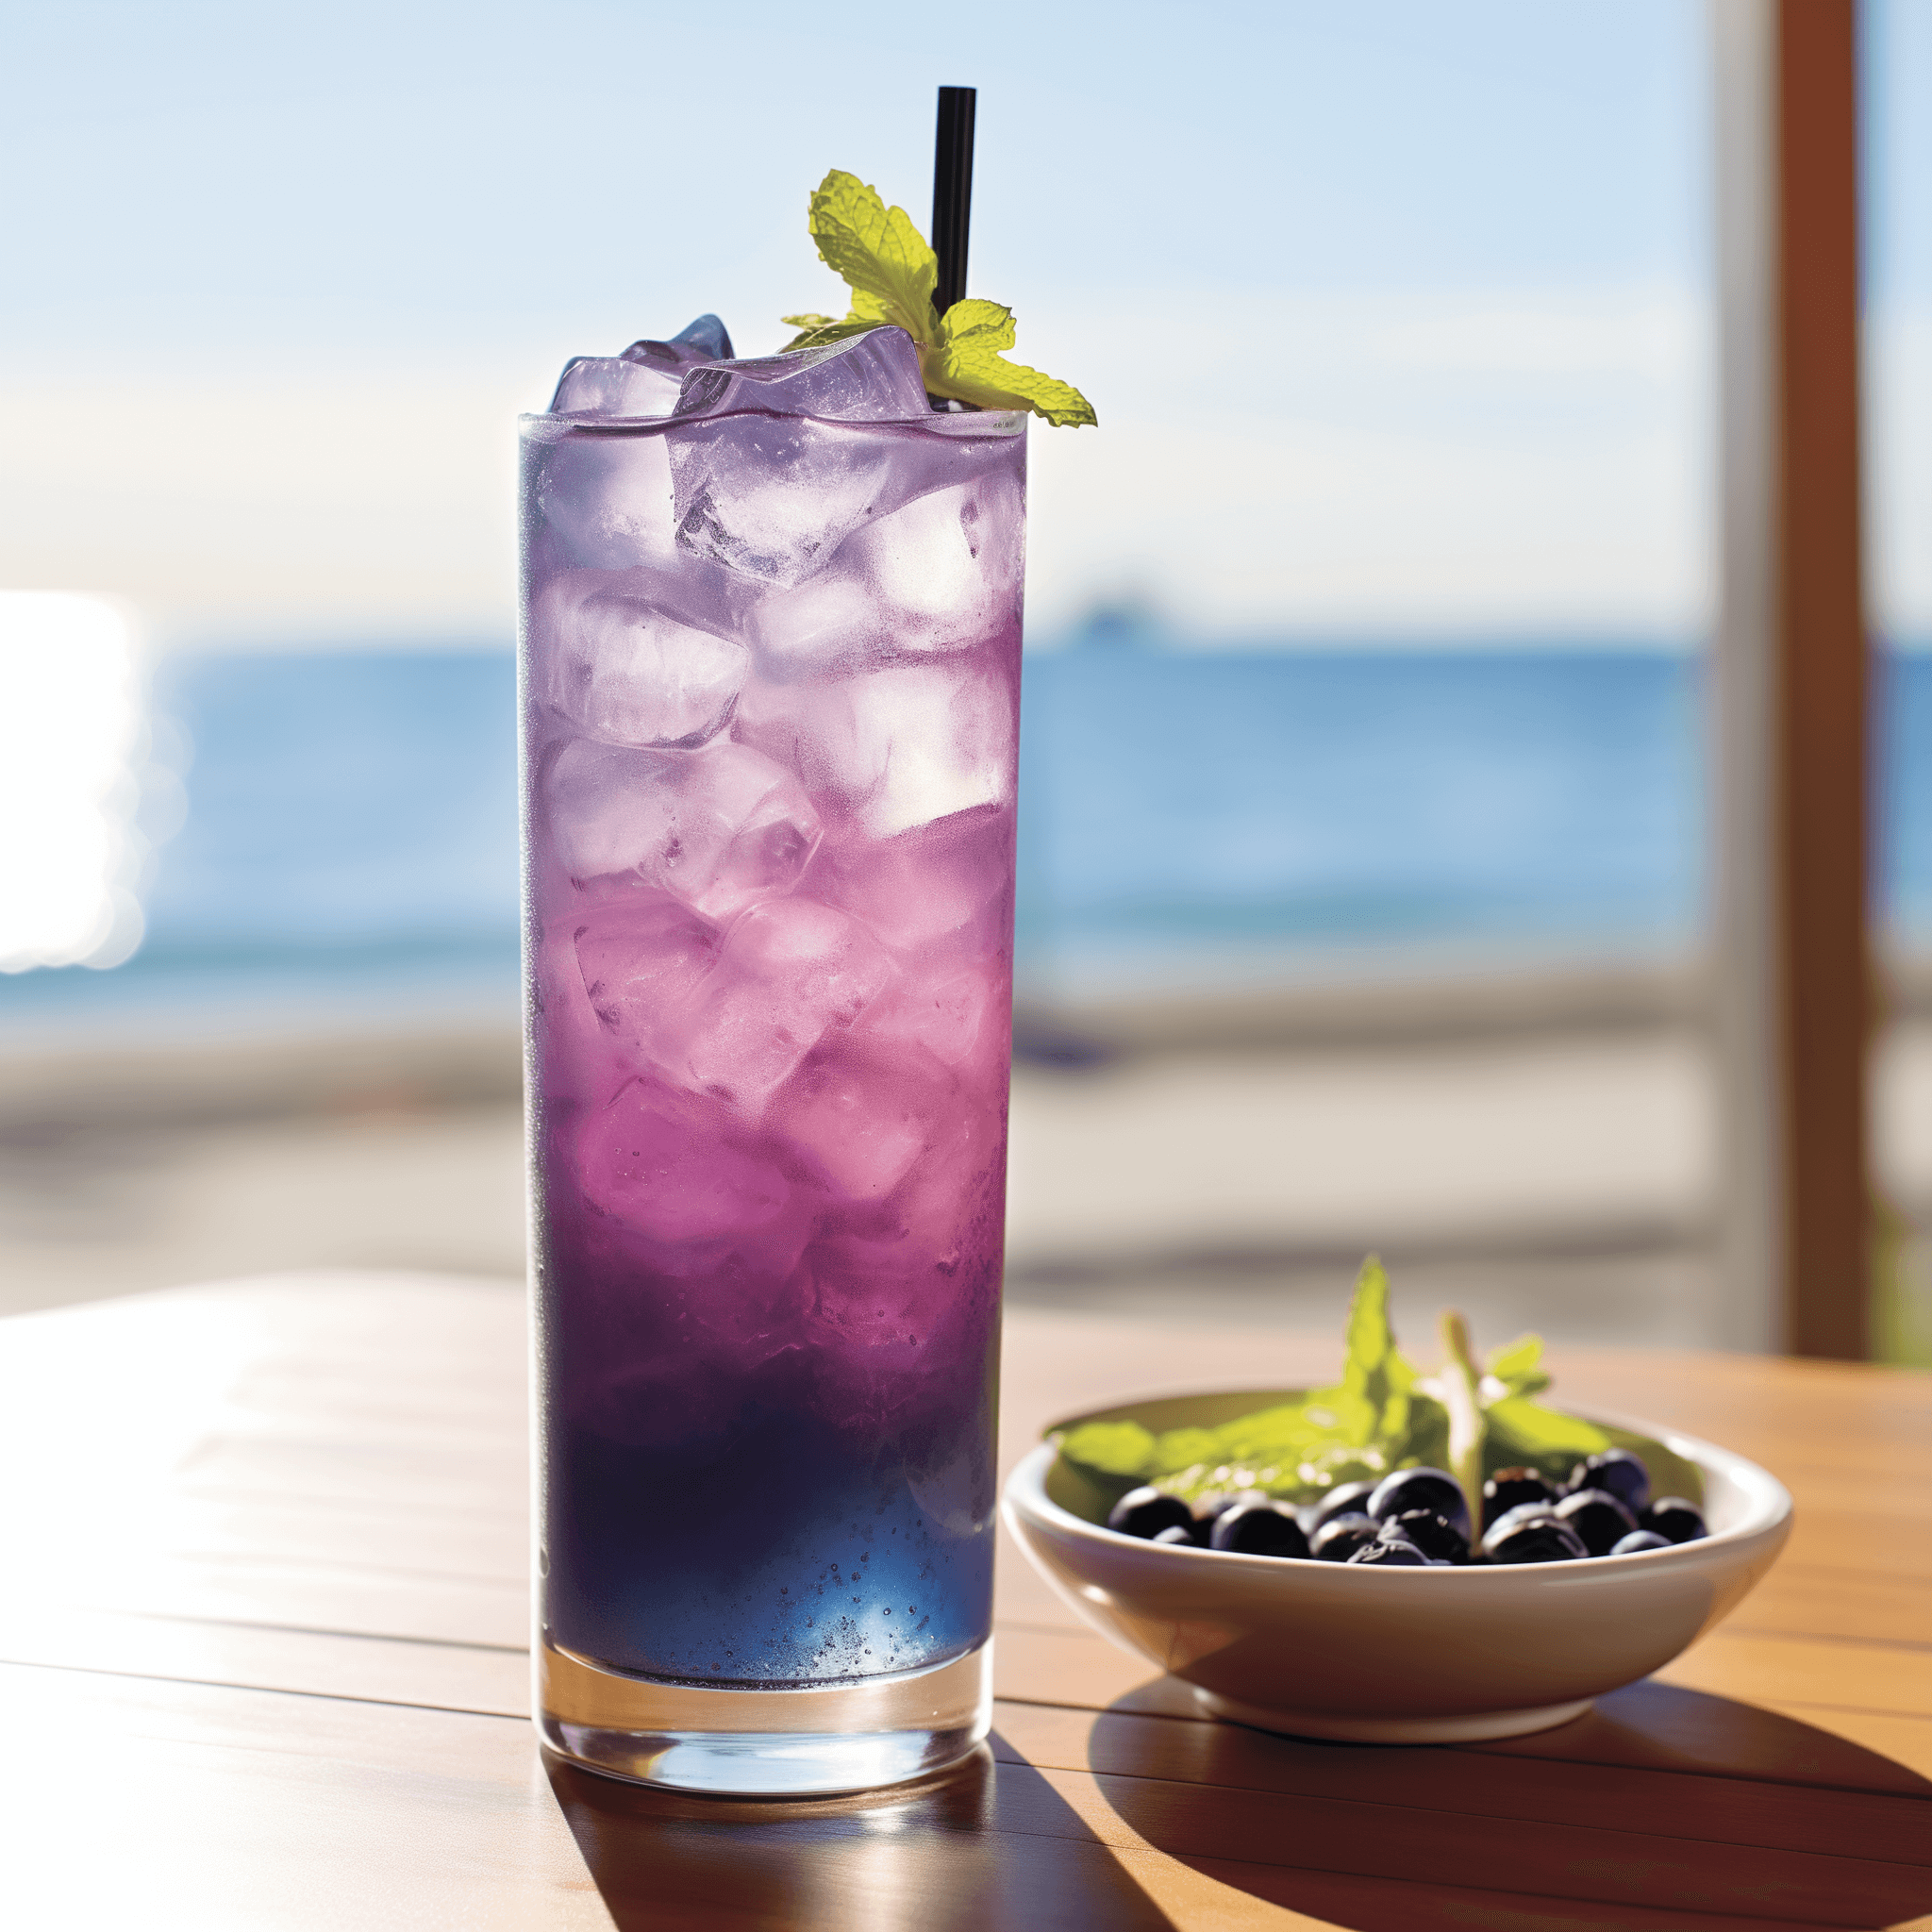 Blueberry Tequila Smash Cocktail Recipe - The Blueberry Tequila Smash is a harmonious blend of sweet and tart with a tequila kick. The muddled blueberries provide a fresh and fruity base, while the mint adds a cool, refreshing undertone. The agave syrup rounds out the sweetness, and the lime juice brings a zesty tang.